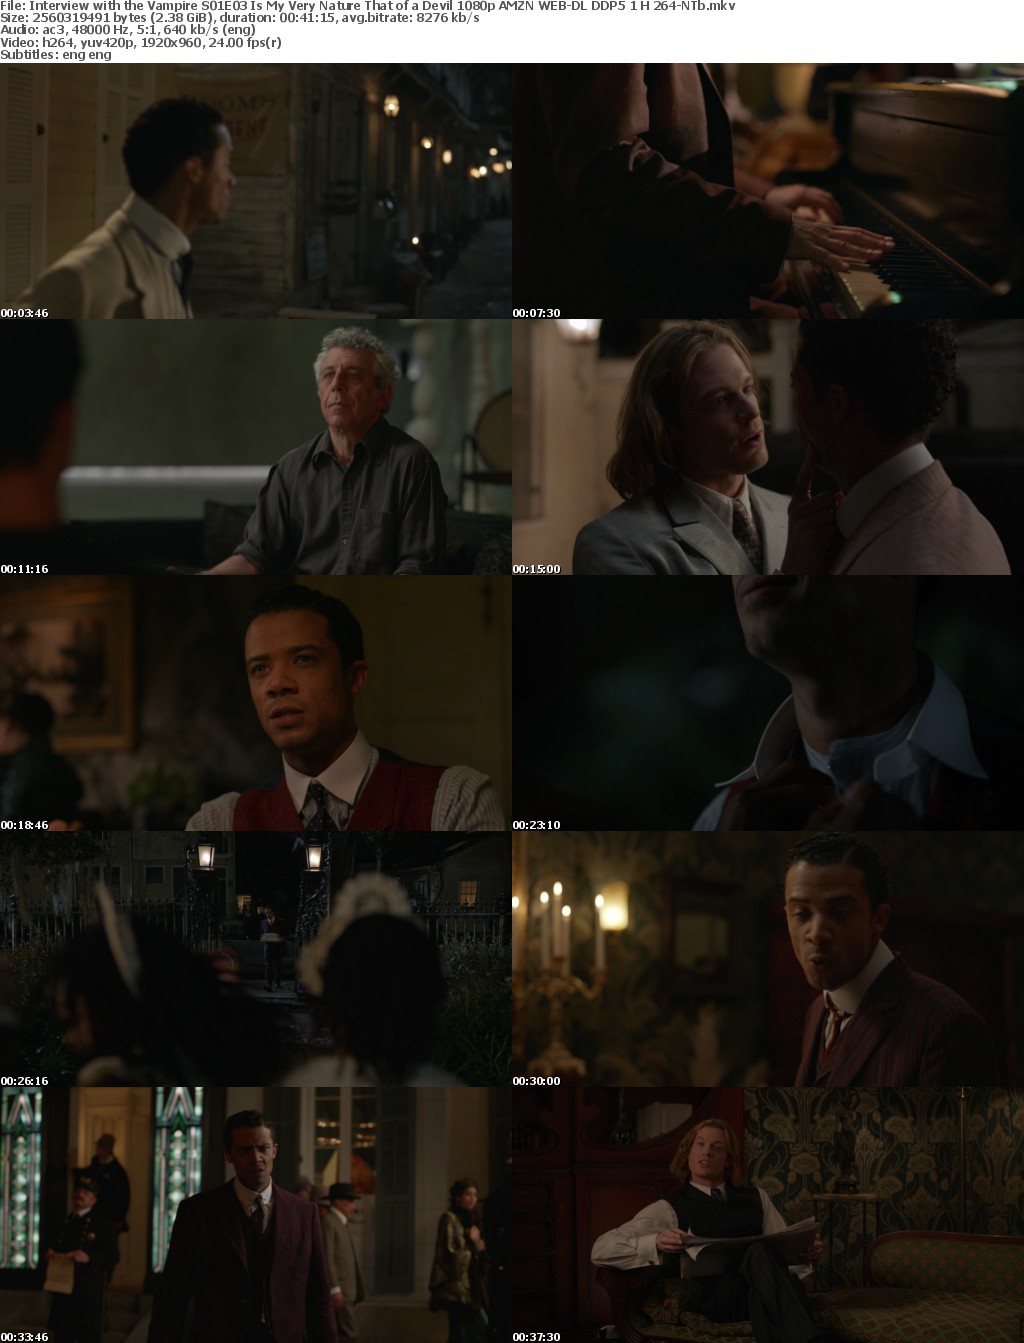 Interview with the Vampire S01E03 Is My Very Nature That of a Devil 1080p AMZN WEB-DL DDP5 1 H 264-NTb